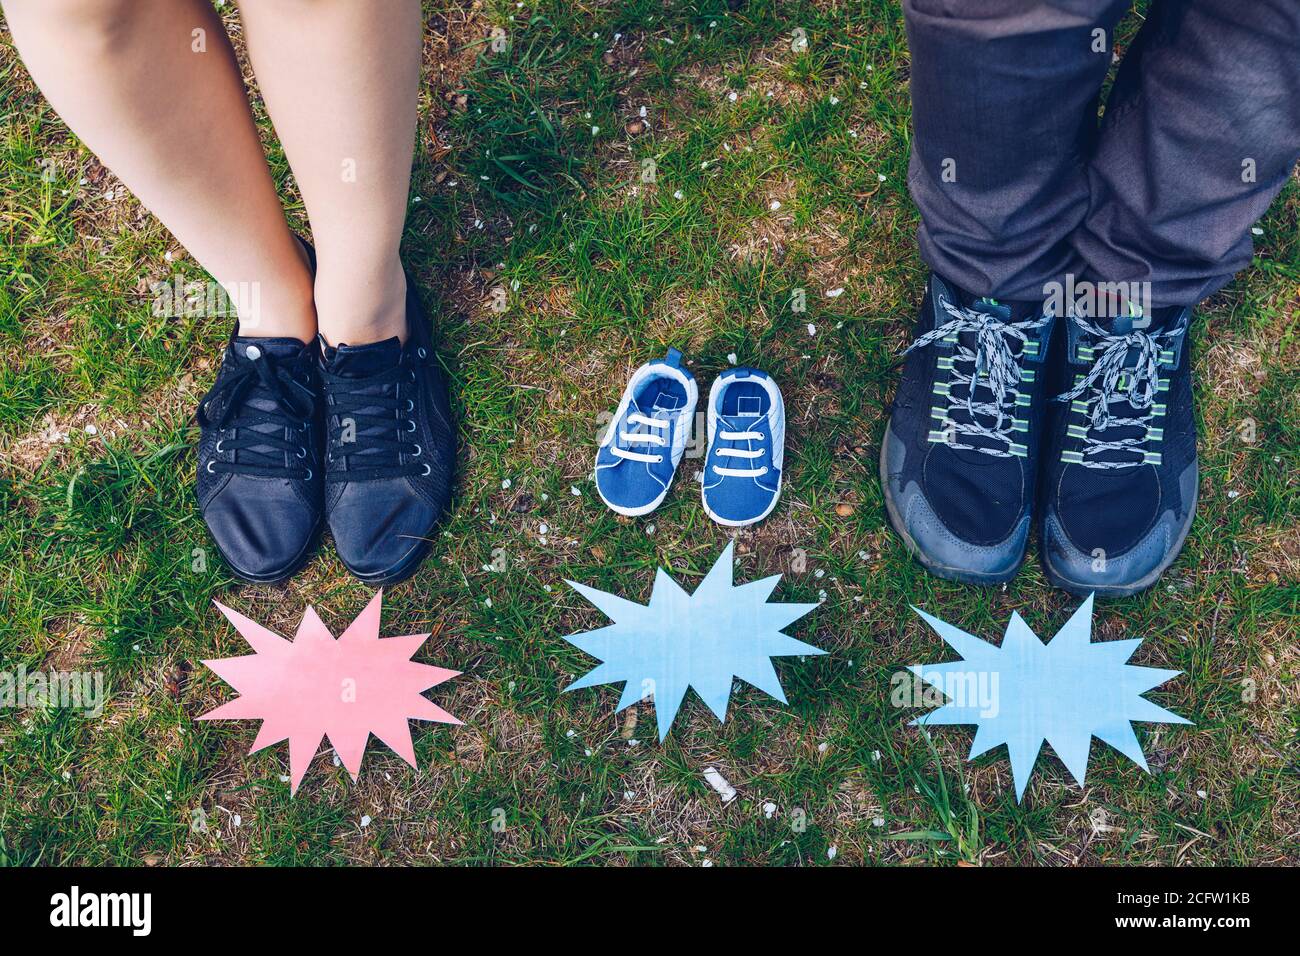 Young couple waiting for baby. Expecting parents with little baby boy shoes. Concept of Parents-To-Be. Shoes and sneakers of parents and expected baby Stock Photo